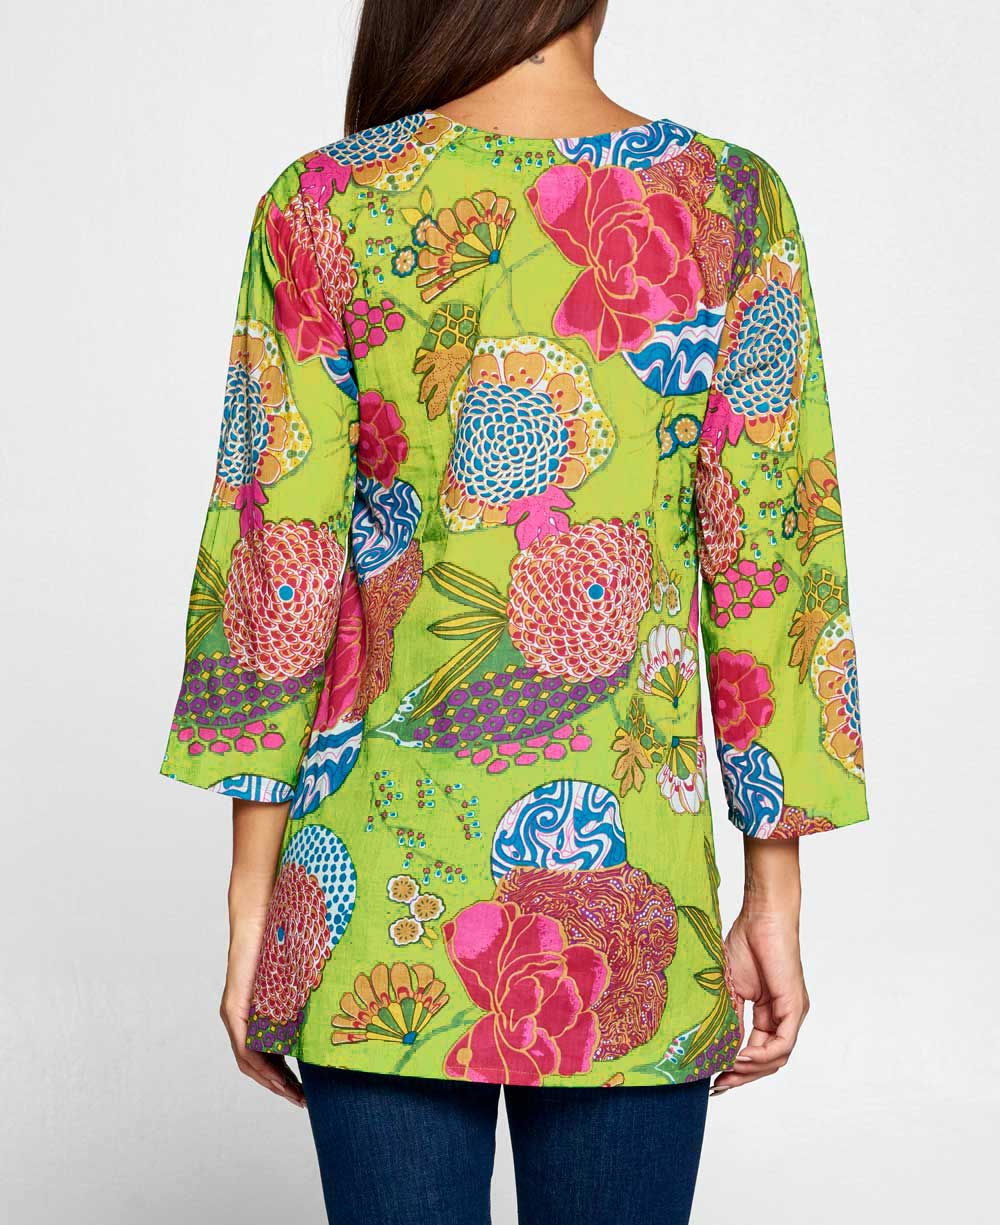 Green Printed Floral Design Tunic Top for Women Back view